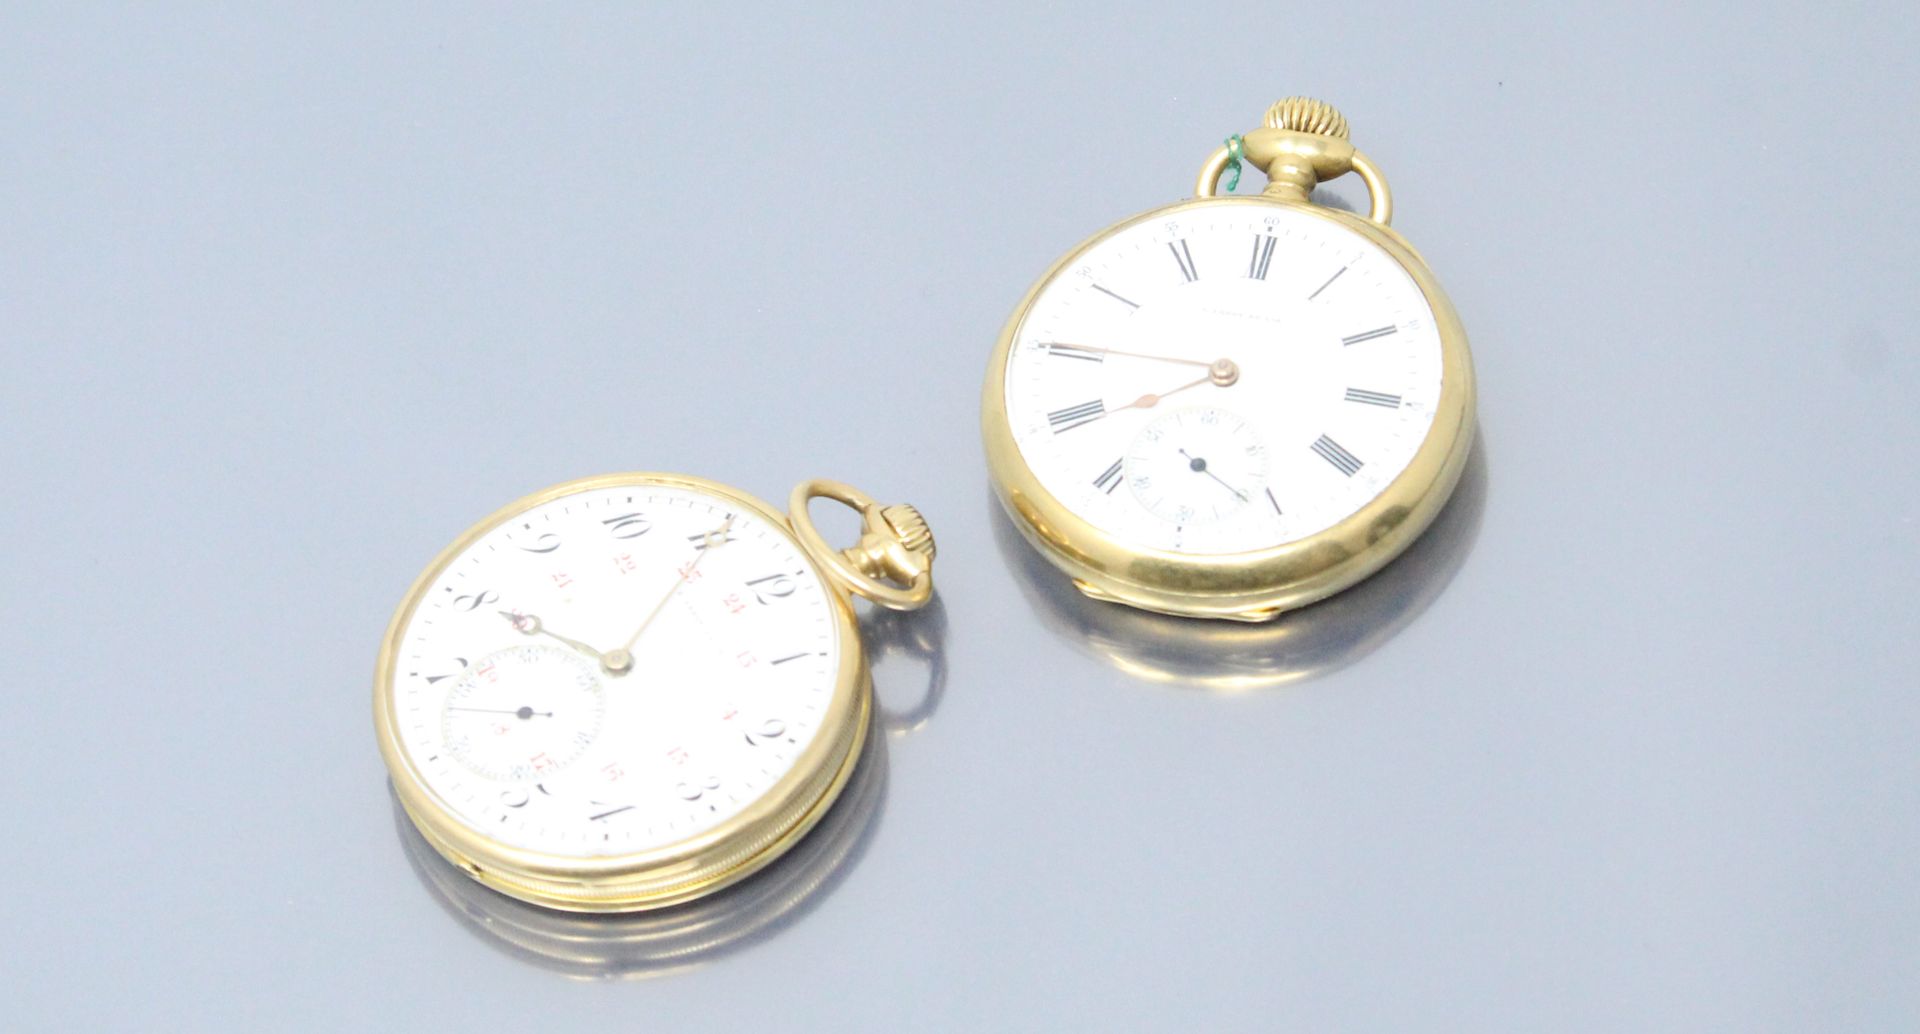 Null LEROY & Son

Set of two 18k (750) yellow gold pocket watches.

Dials with w&hellip;